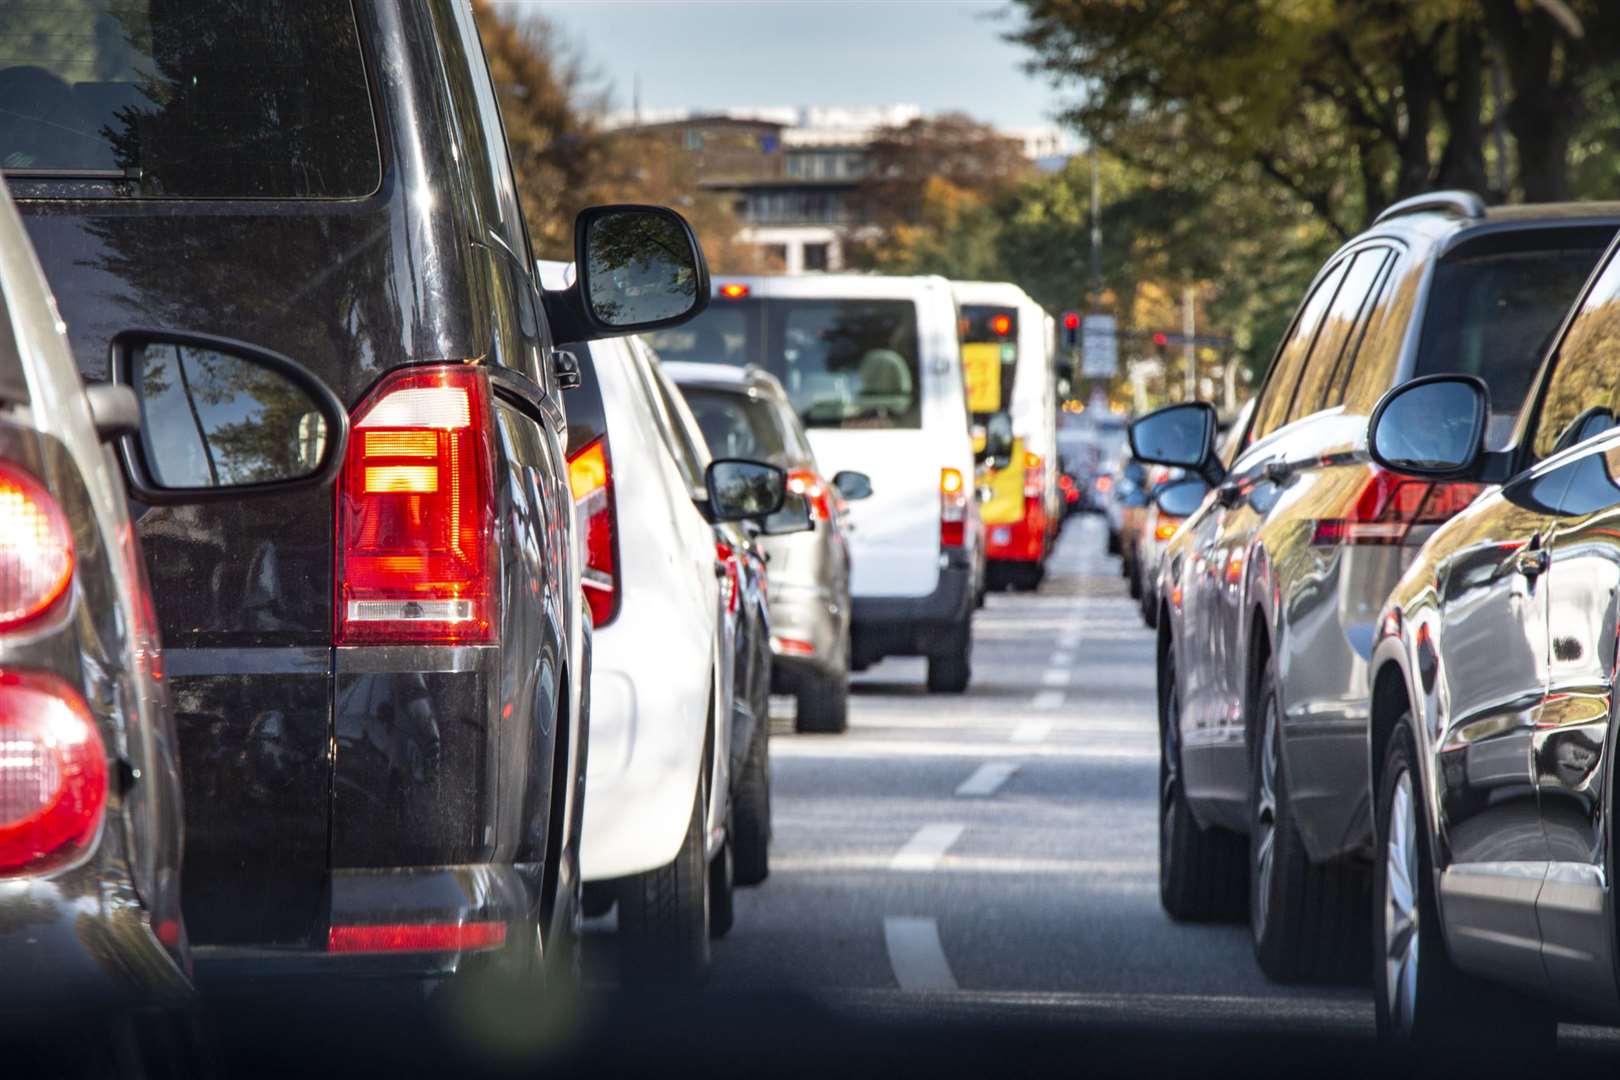 The congestion and Ulez have proved successful so far in reducing pollution